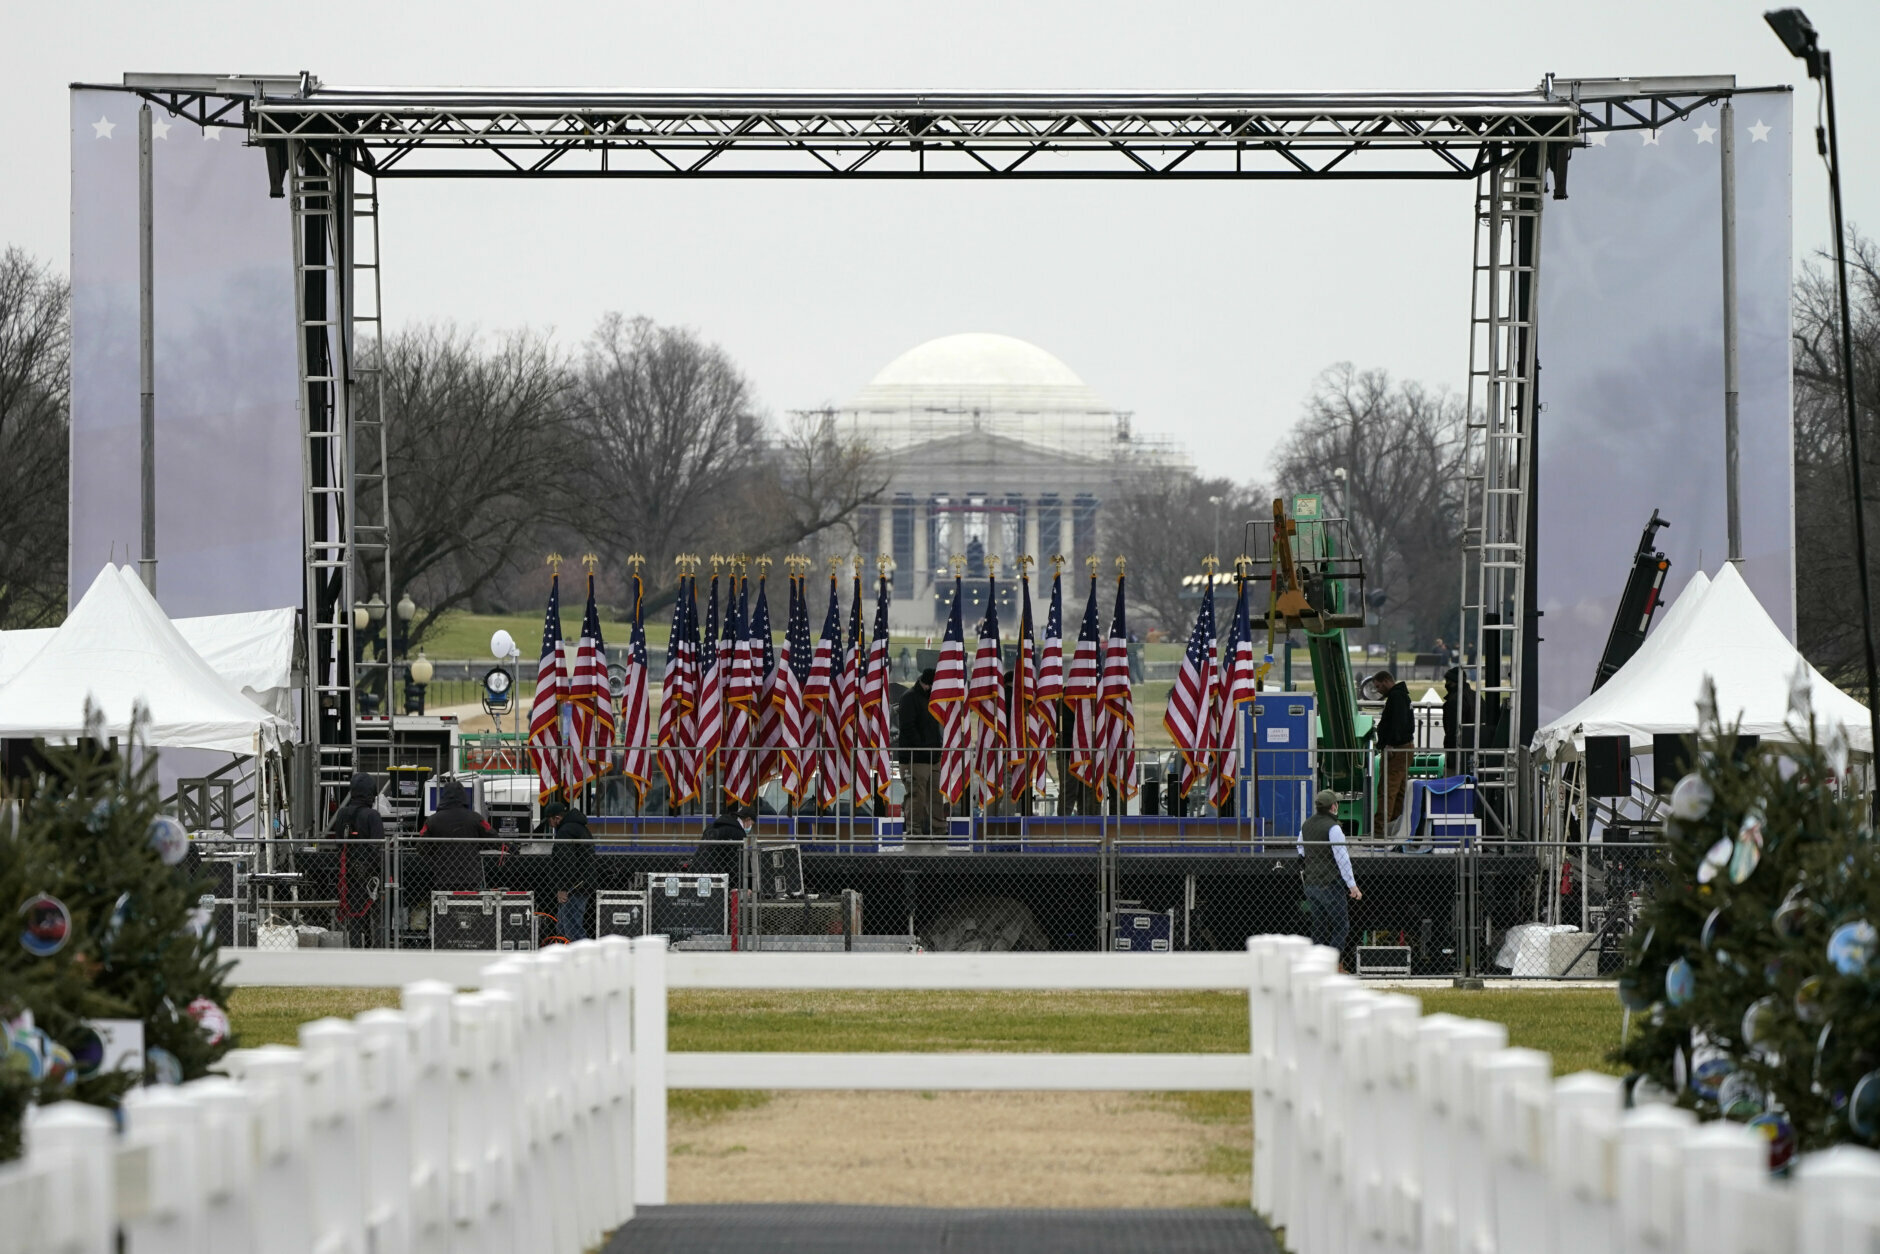 Workers build the stage on the ellipse near the White House on Tuesday, Jan. 5, 2021, ahead of expected rallies on Jan. 6 in support of President Donald Trump. The Thomas Jefferson Memorial can be seen in the background. (AP Photo/Jacquelyn Martin)